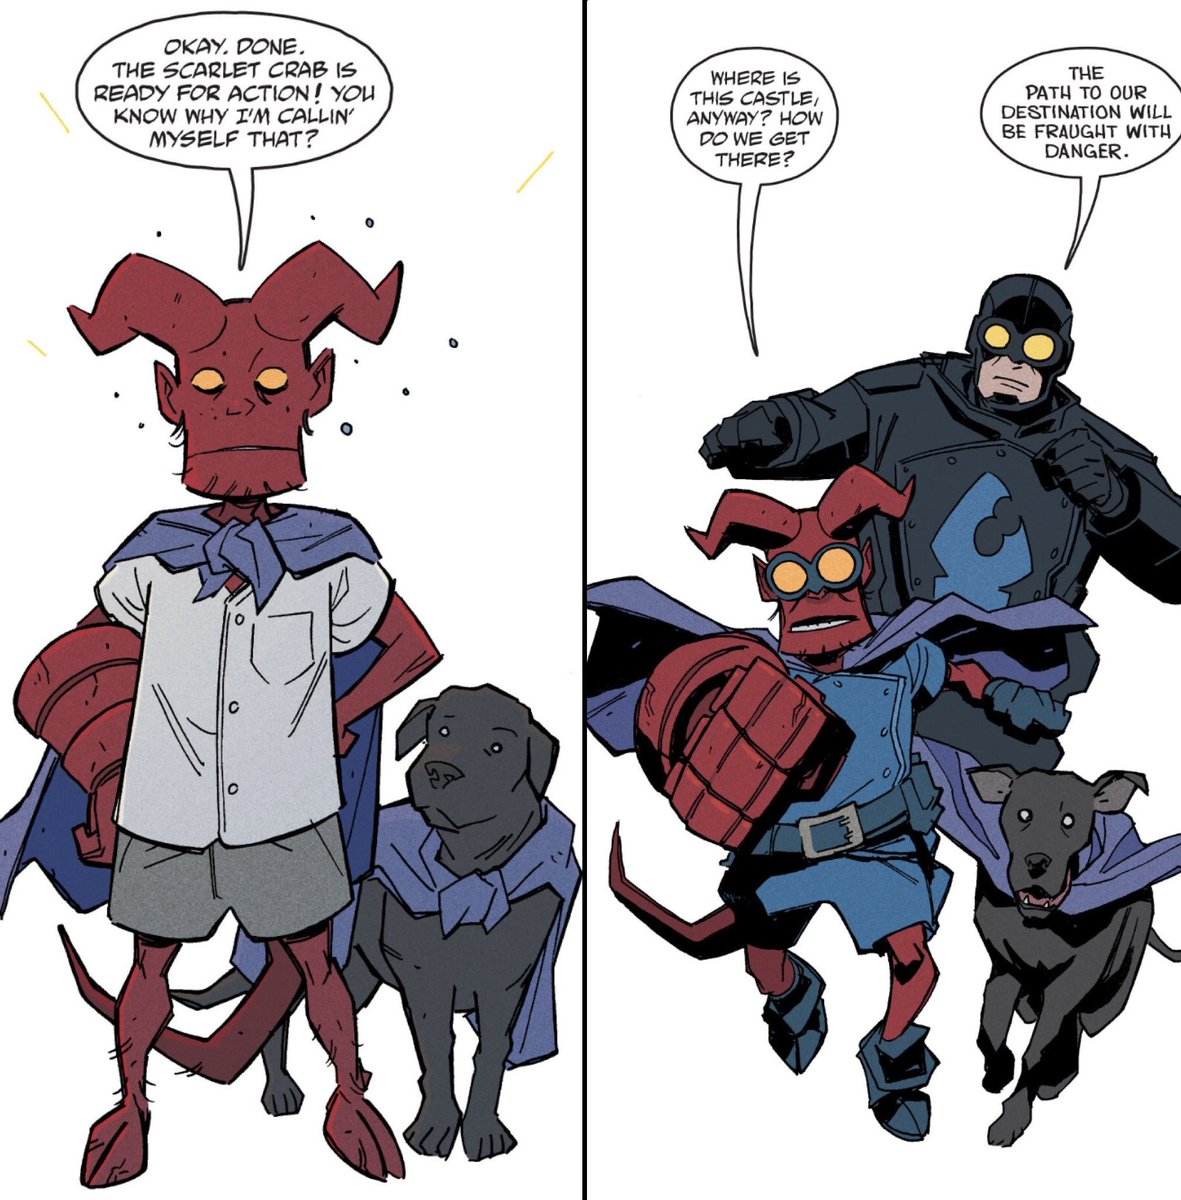 A sick little boy and his dog or “Scarlet Crab, Mac & Lobster Johnson to the rescue”?! We discuss “Young Hellboy: Assault on Castle Death,” on this week’s podcast! #hellboybookclub #podcast #hellboy #mikemignola #craigrousseau #lobsterjohnson #chrisohalloran #darkhorsecomics